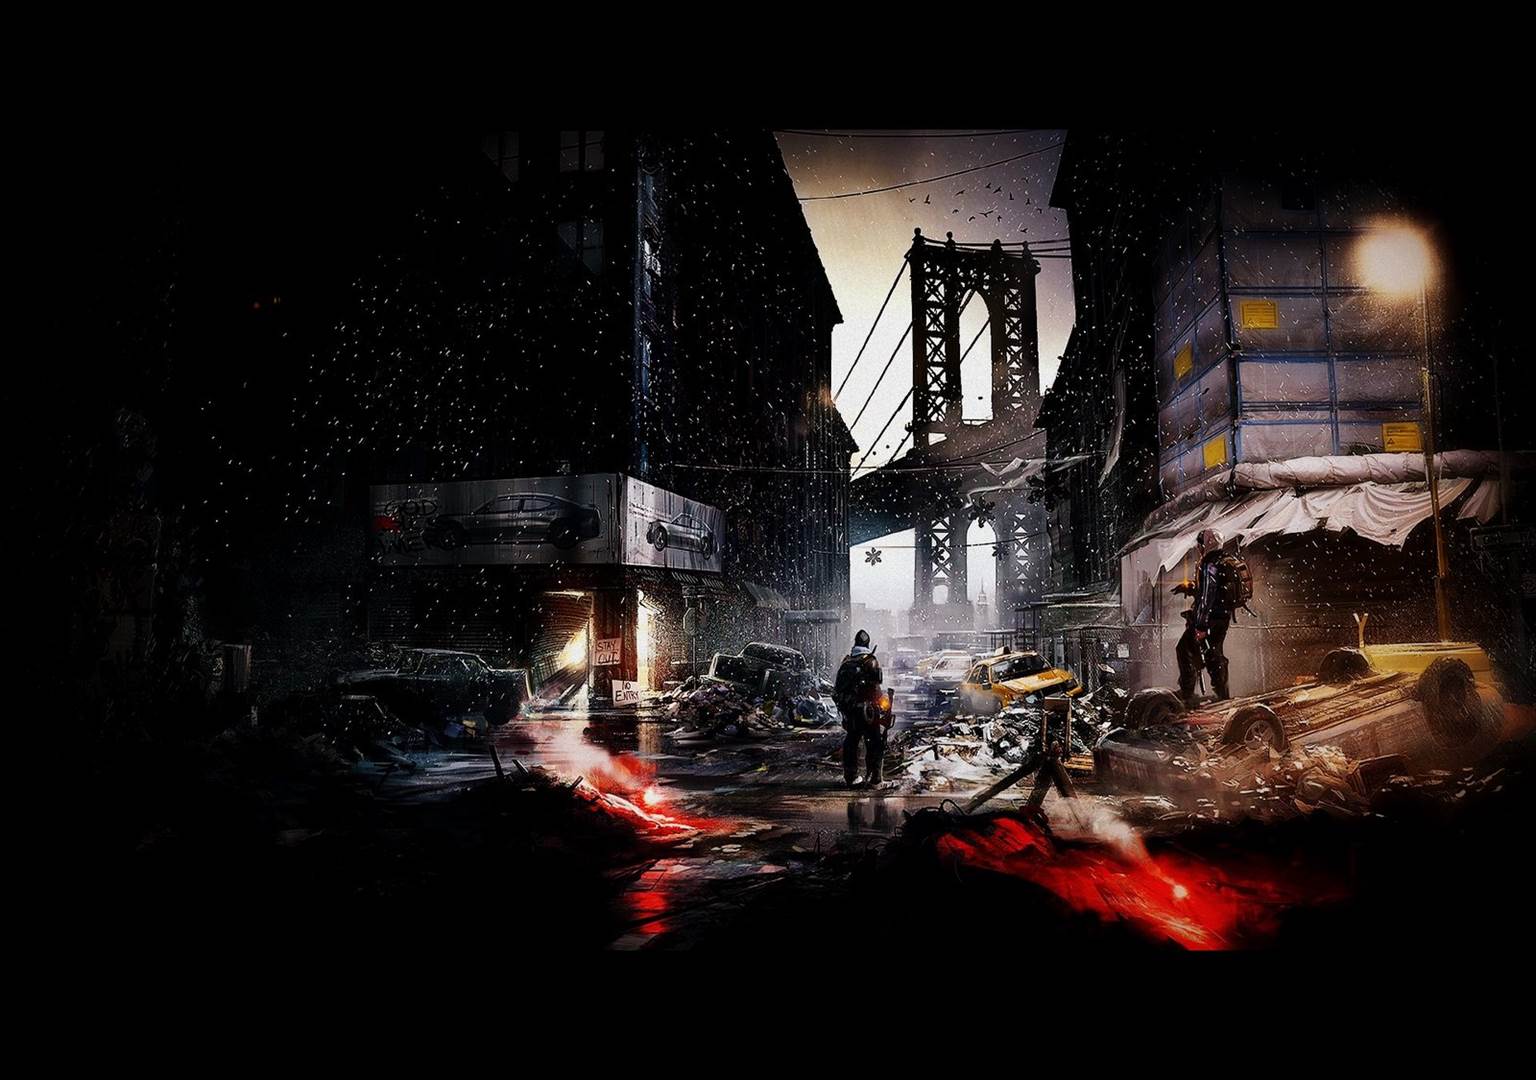 Tom Clancys The Division Wallpapers in 1080P HD GamingBoltcom